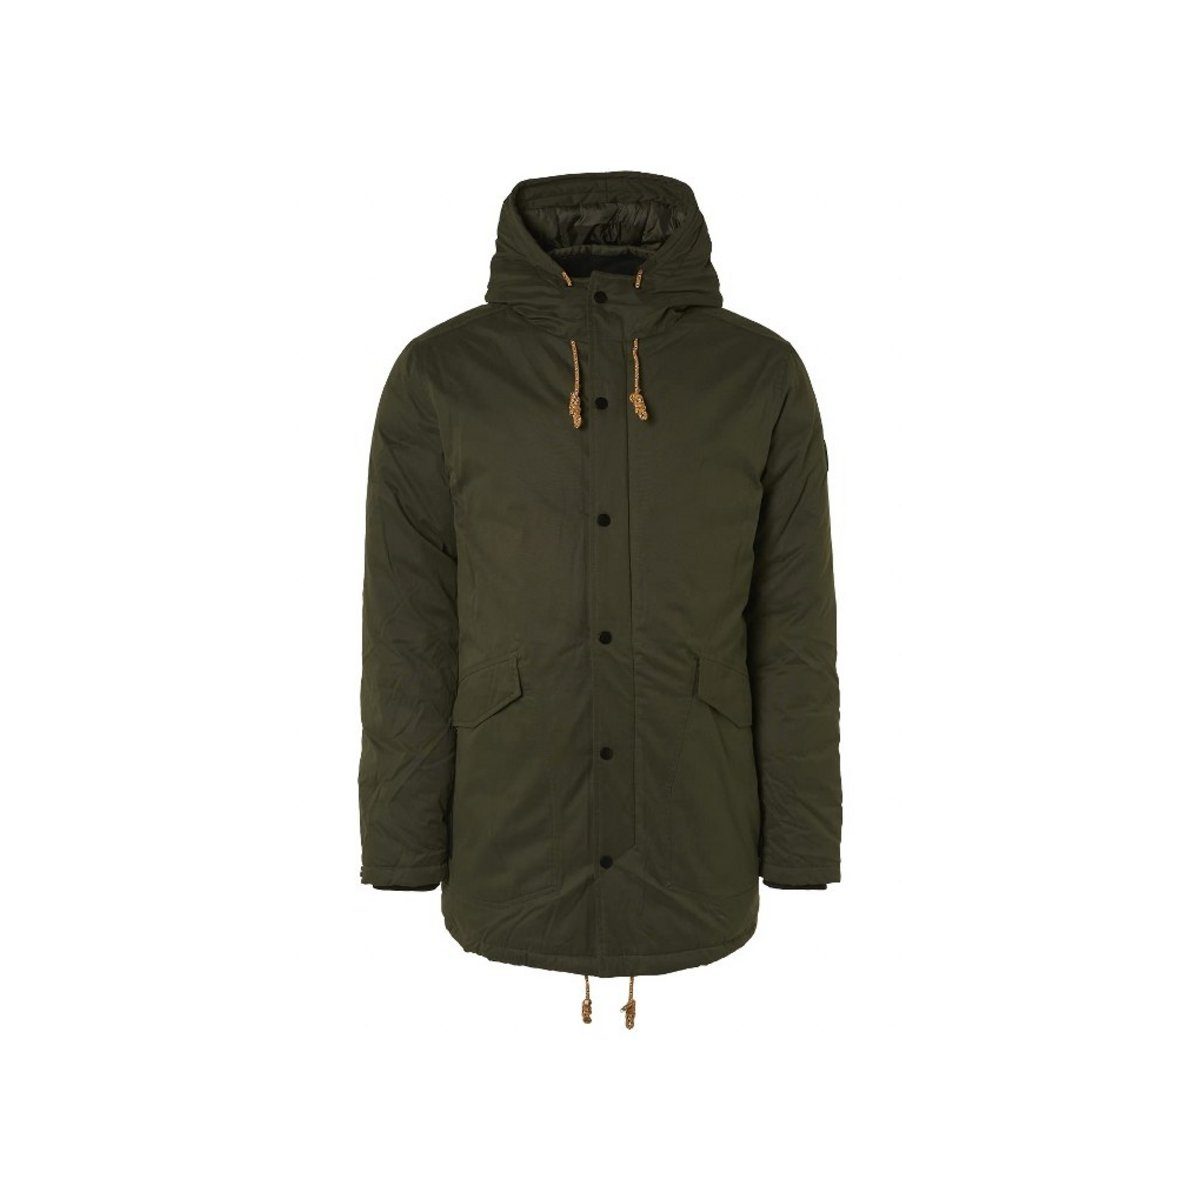 EXCESS NO (1-St) Anorak olive